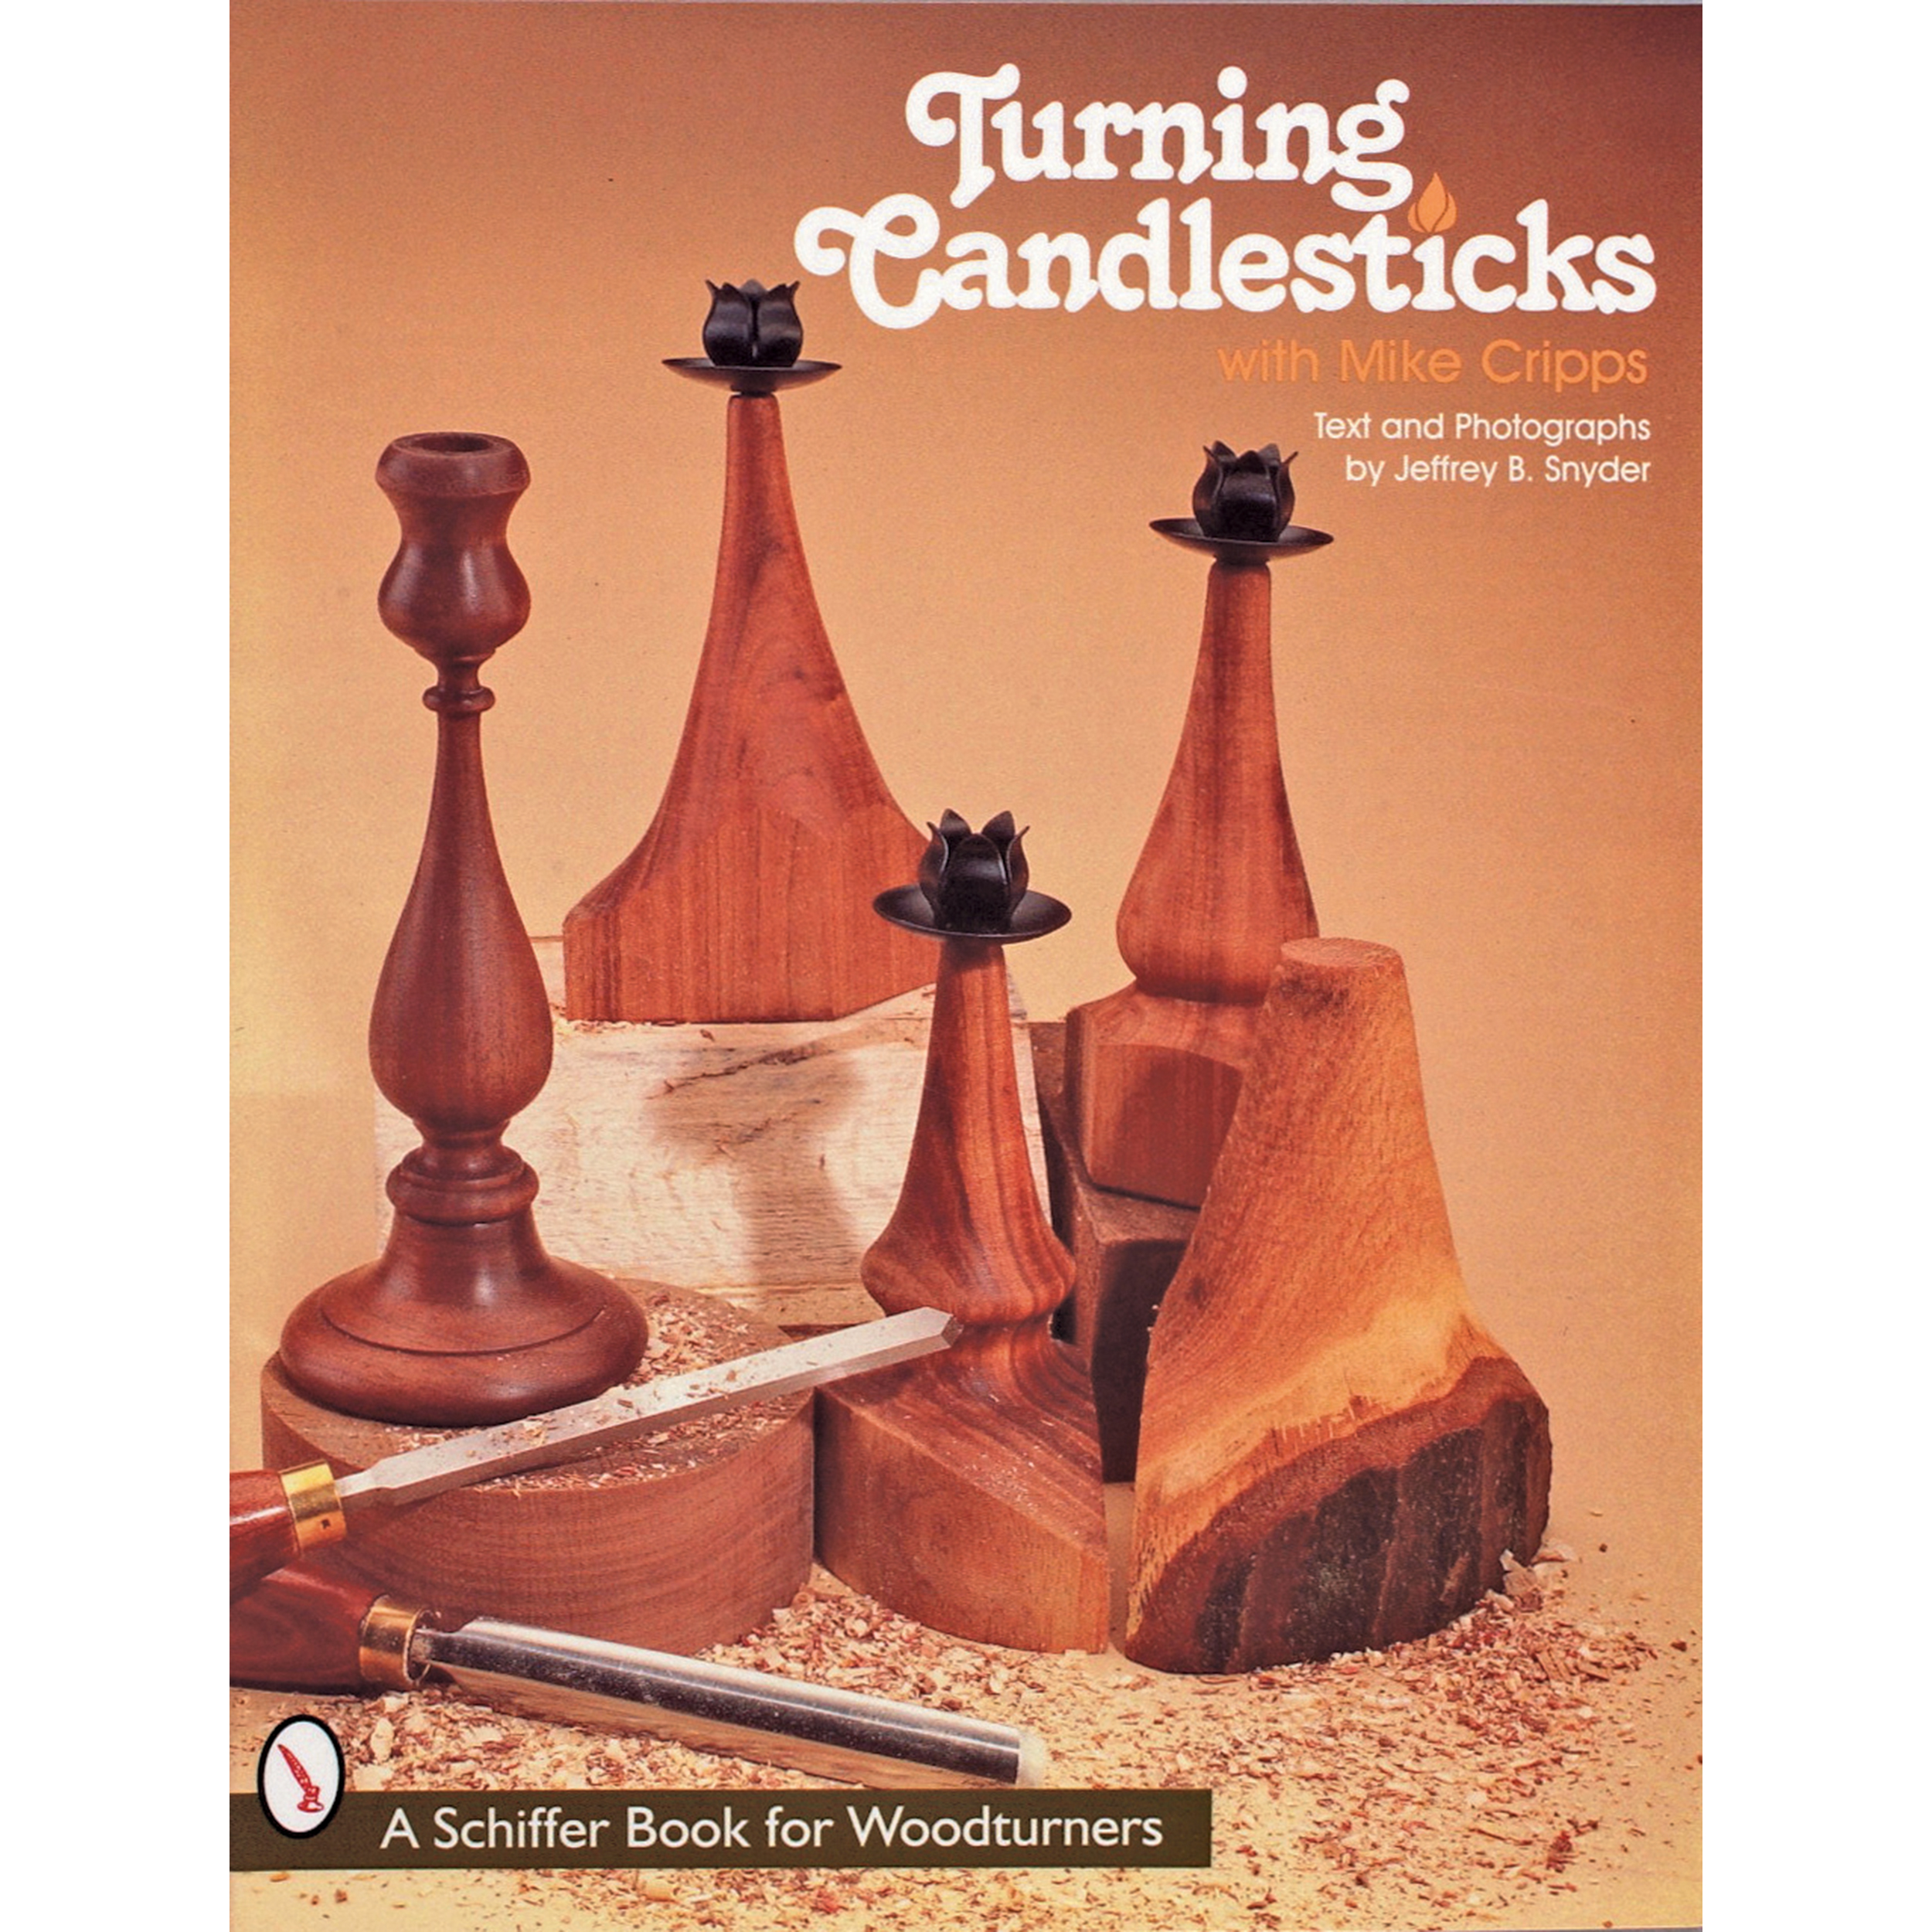 Turning Candlesticks With Mike Cripps